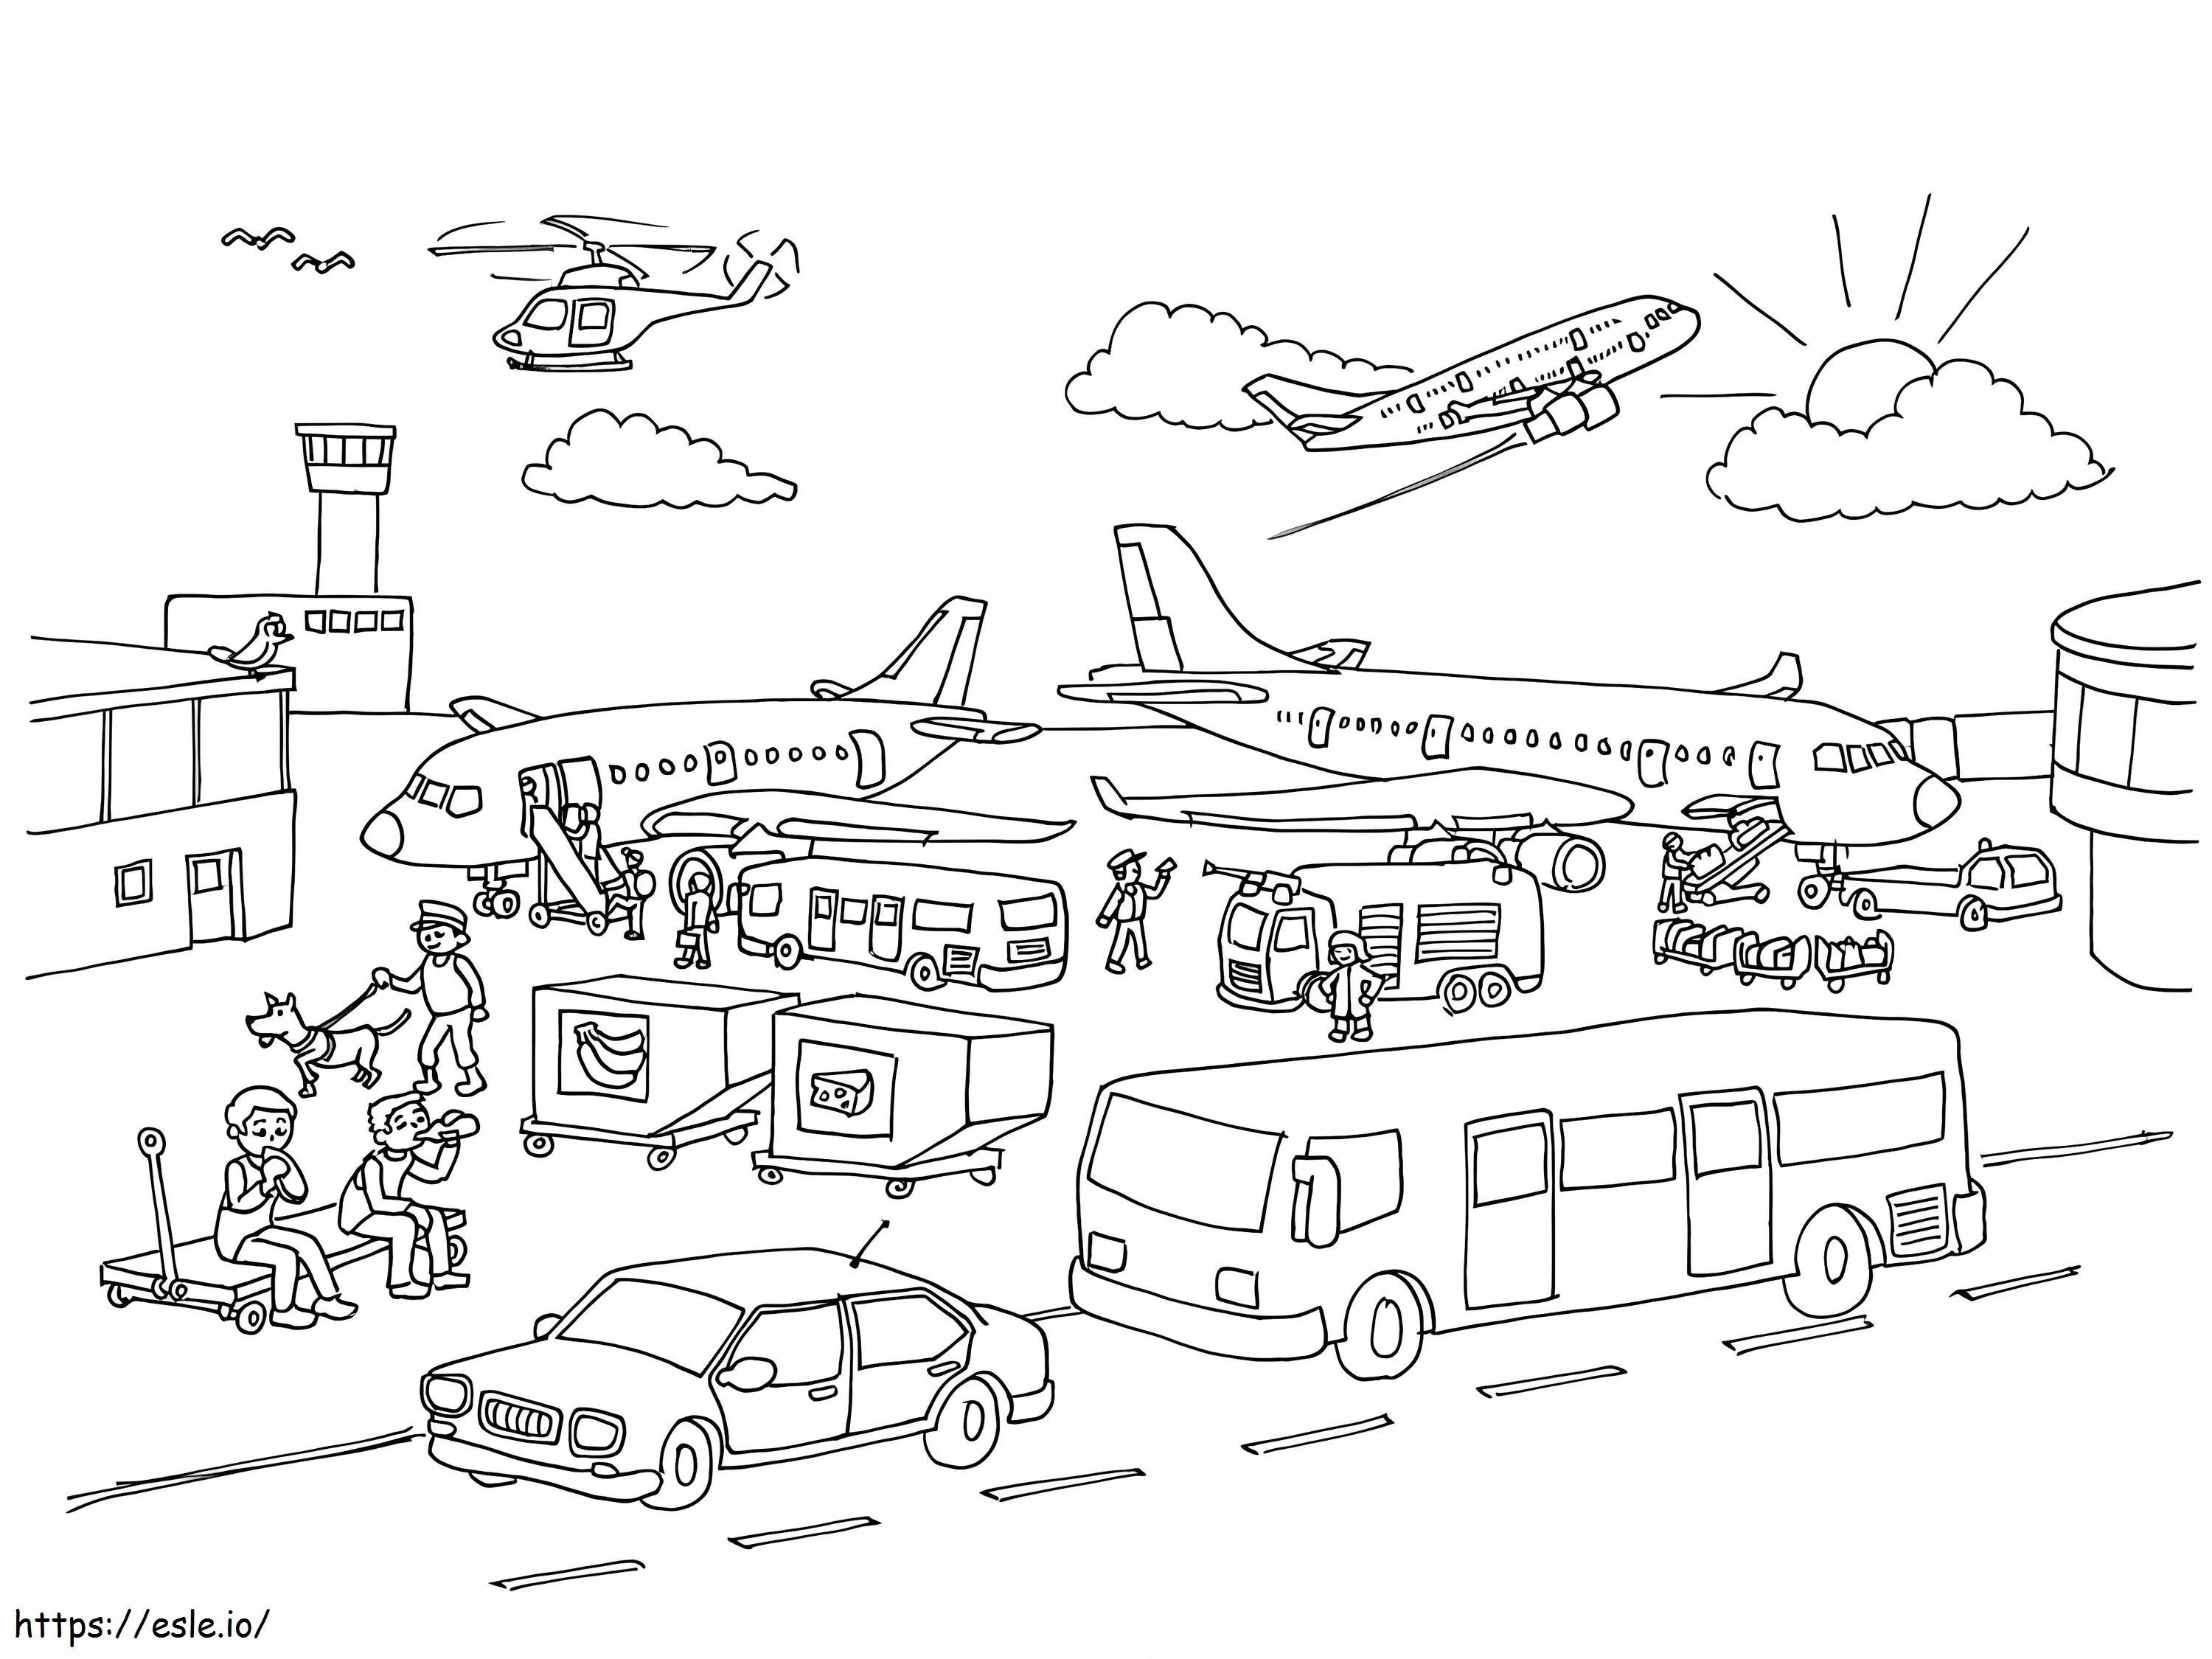 Free Airport coloring page